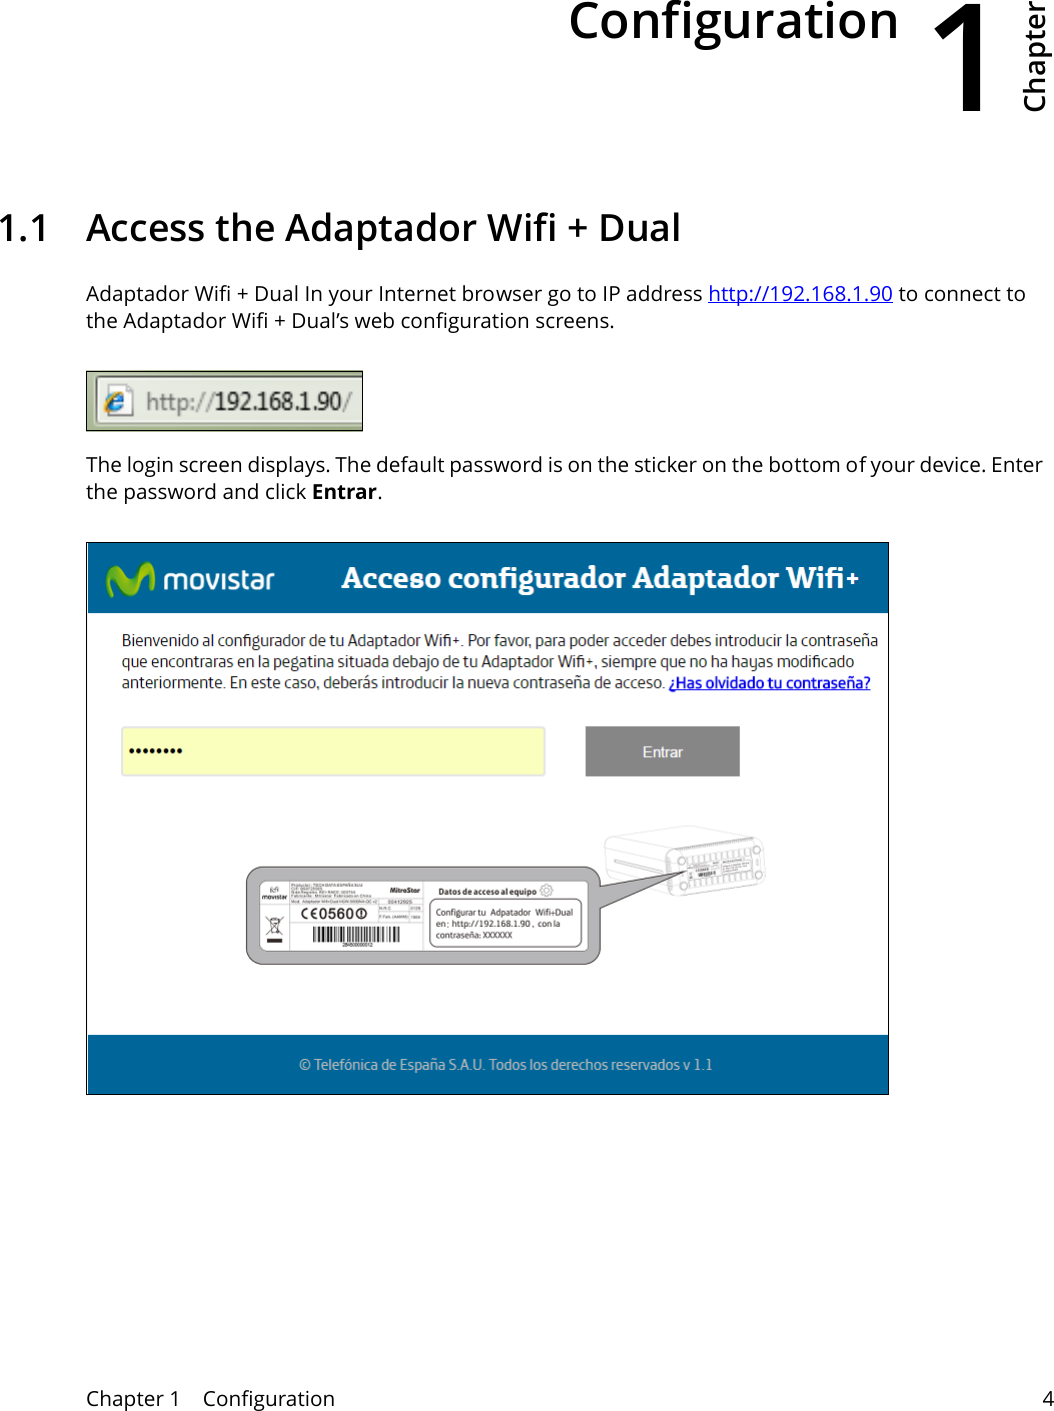 1Chapter Chapter 1    Configuration 4CHAPTER 1 Chapter 1Configuration1.1  Access the Adaptador Wifi + DualAdaptador Wifi + Dual In your Internet browser go to IP address http://192.168.1.90 to connect to the Adaptador Wifi + Dual’s web configuration screens. The login screen displays. The default password is on the sticker on the bottom of your device. Enter the password and click Entrar.Use t